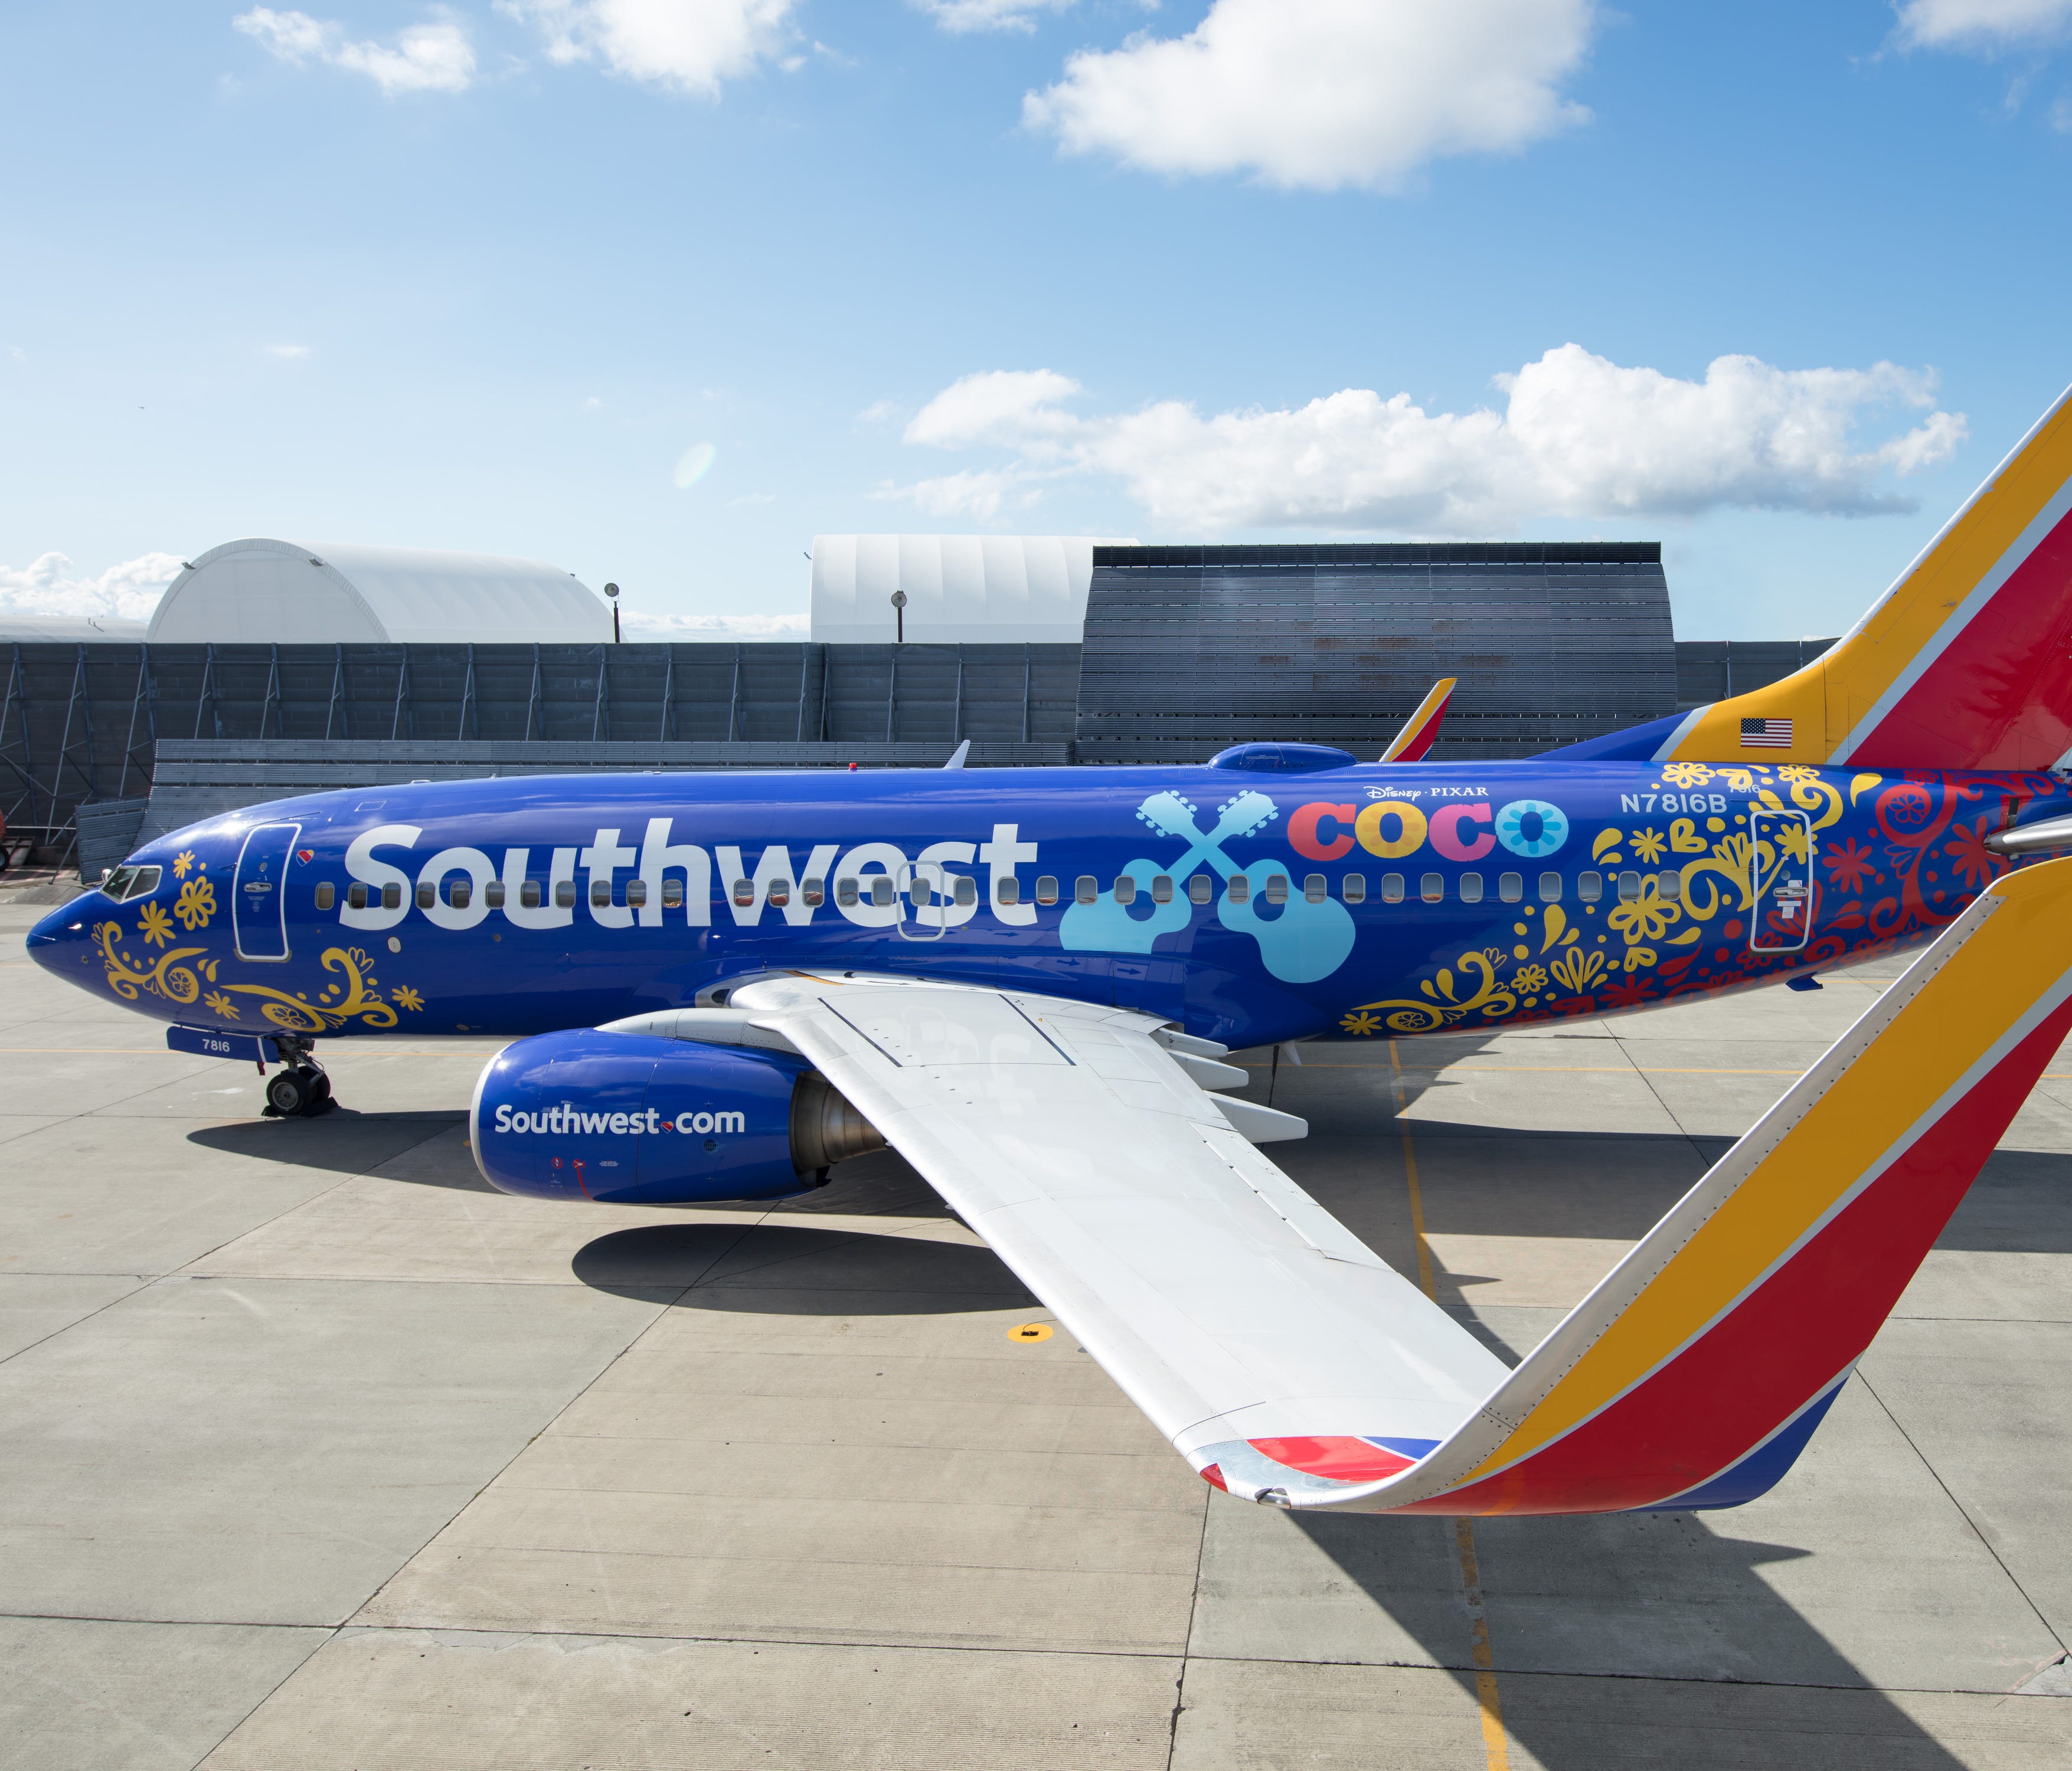 Southwest Airlines unveiled one of its Boeing 737s painted to in the colors of 